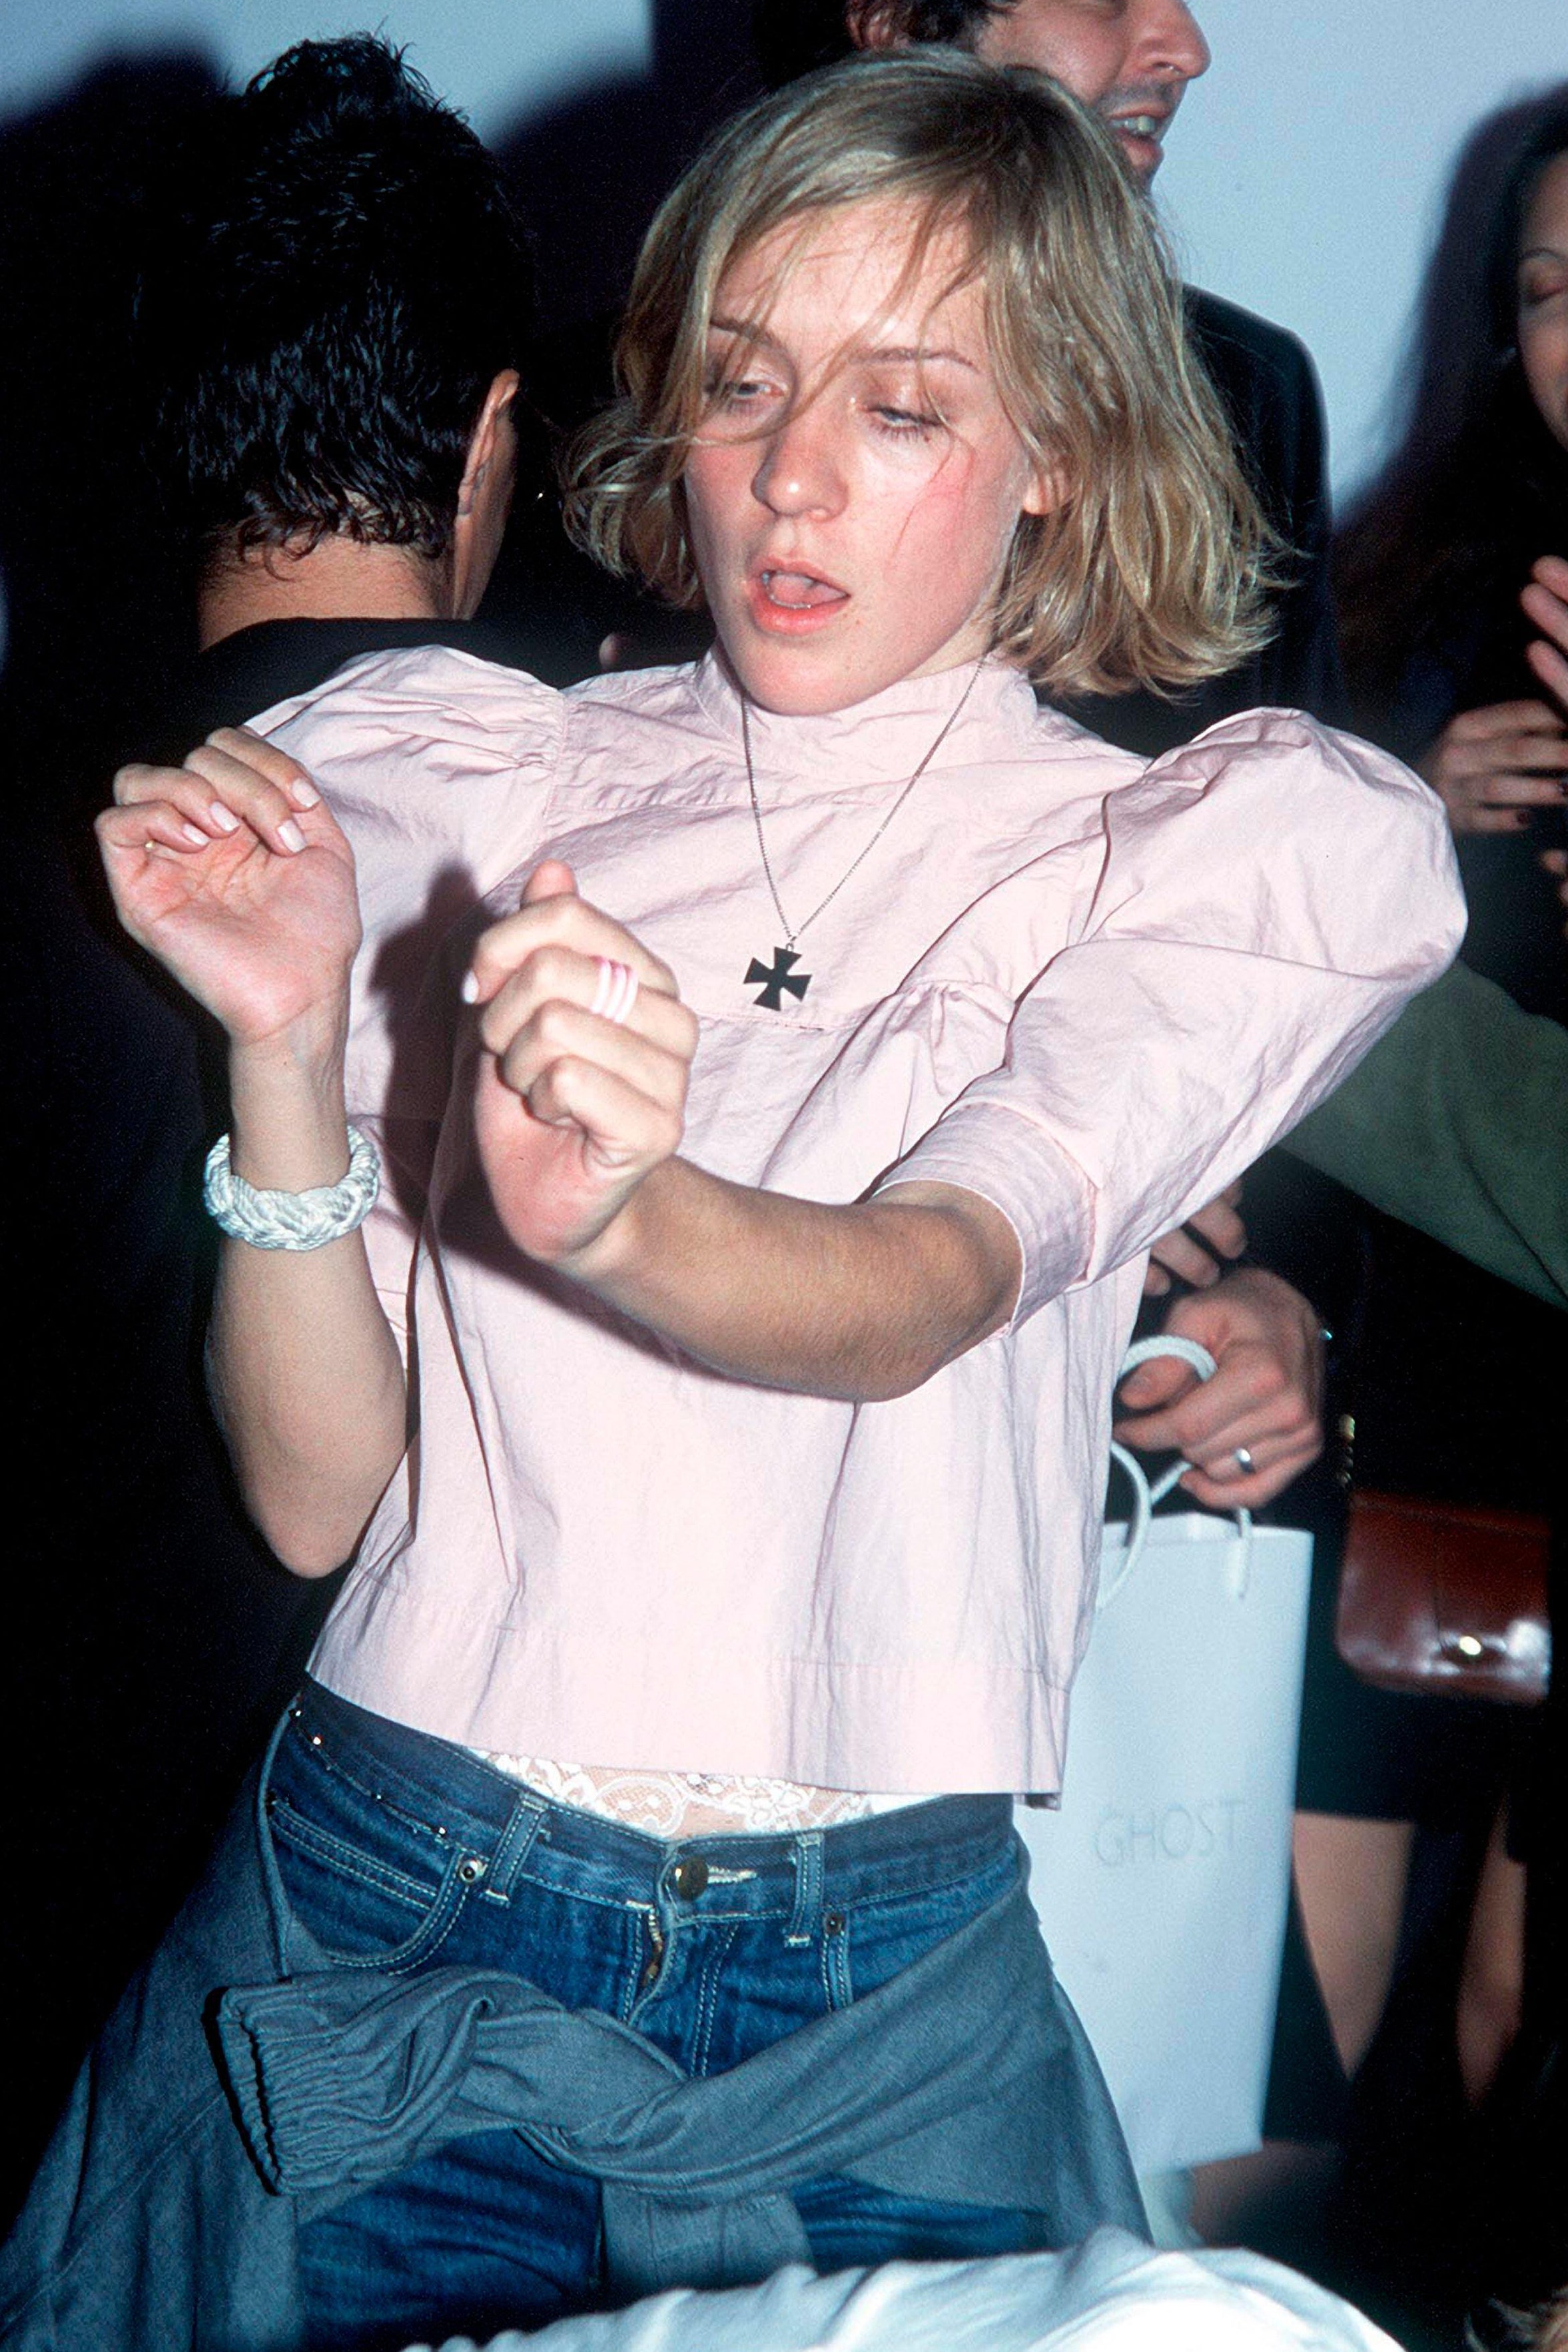 2F6RW3W May 2 2000 New York New York USA CHLOE SEVIGNY dancing during the 'Ghost' Flagship Store Opening in New York.